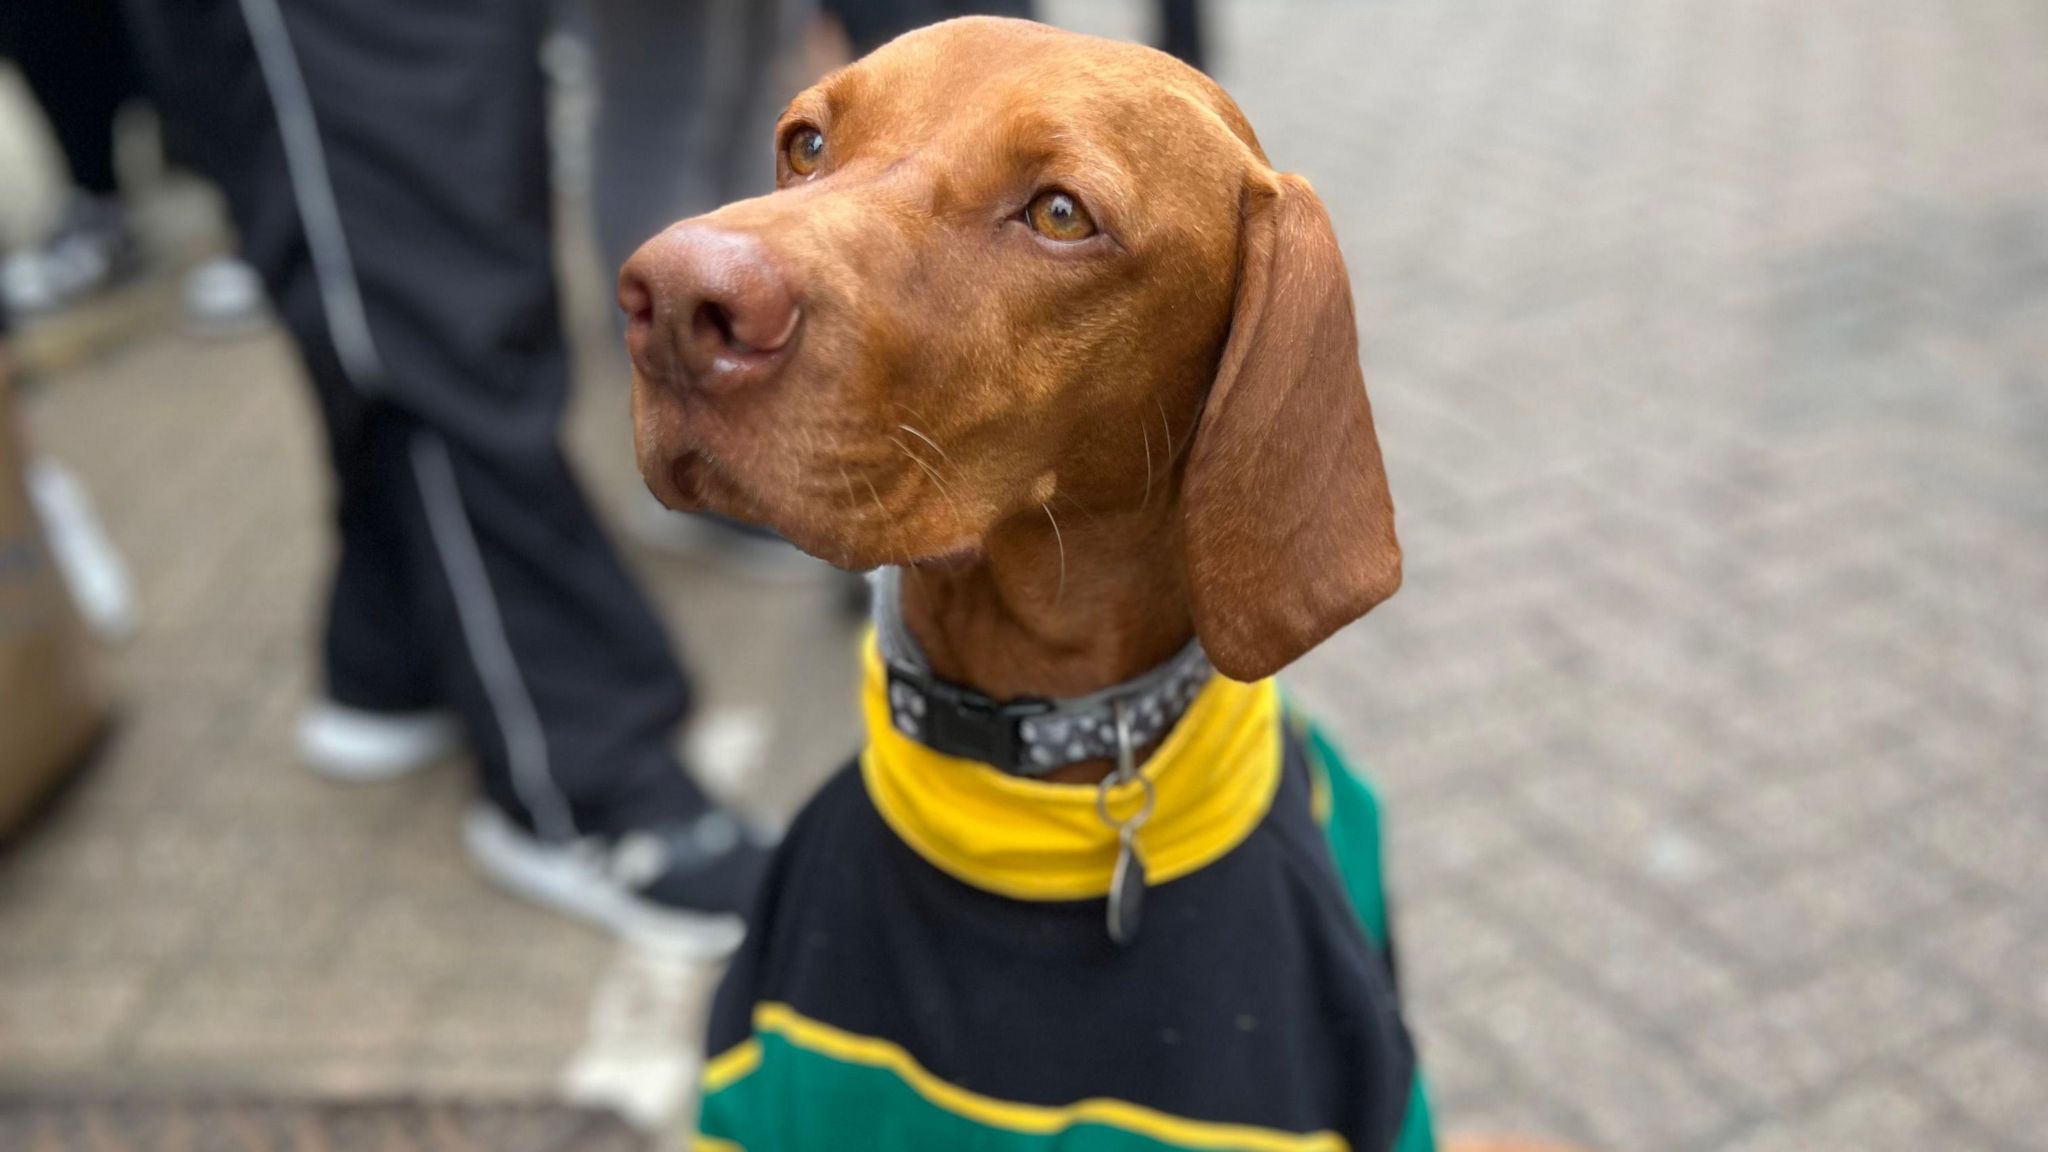 A dog celebrating the Saints Premiership win with its own shirt